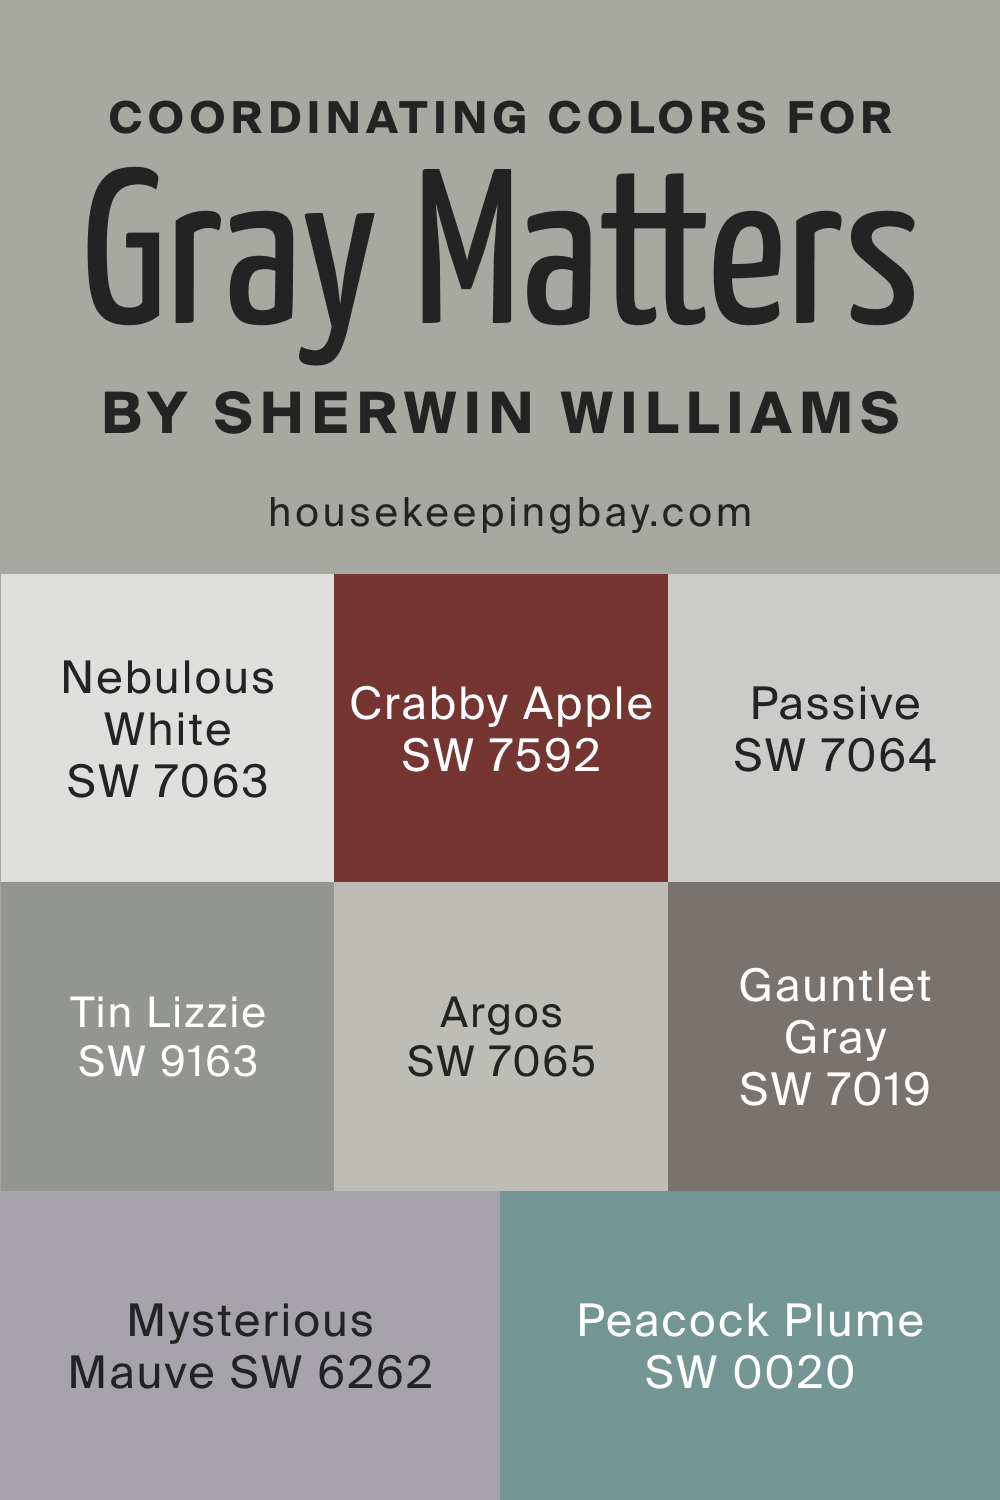 Coordinating Colors for Gray Matters SW 7066 by Sherwin Williams